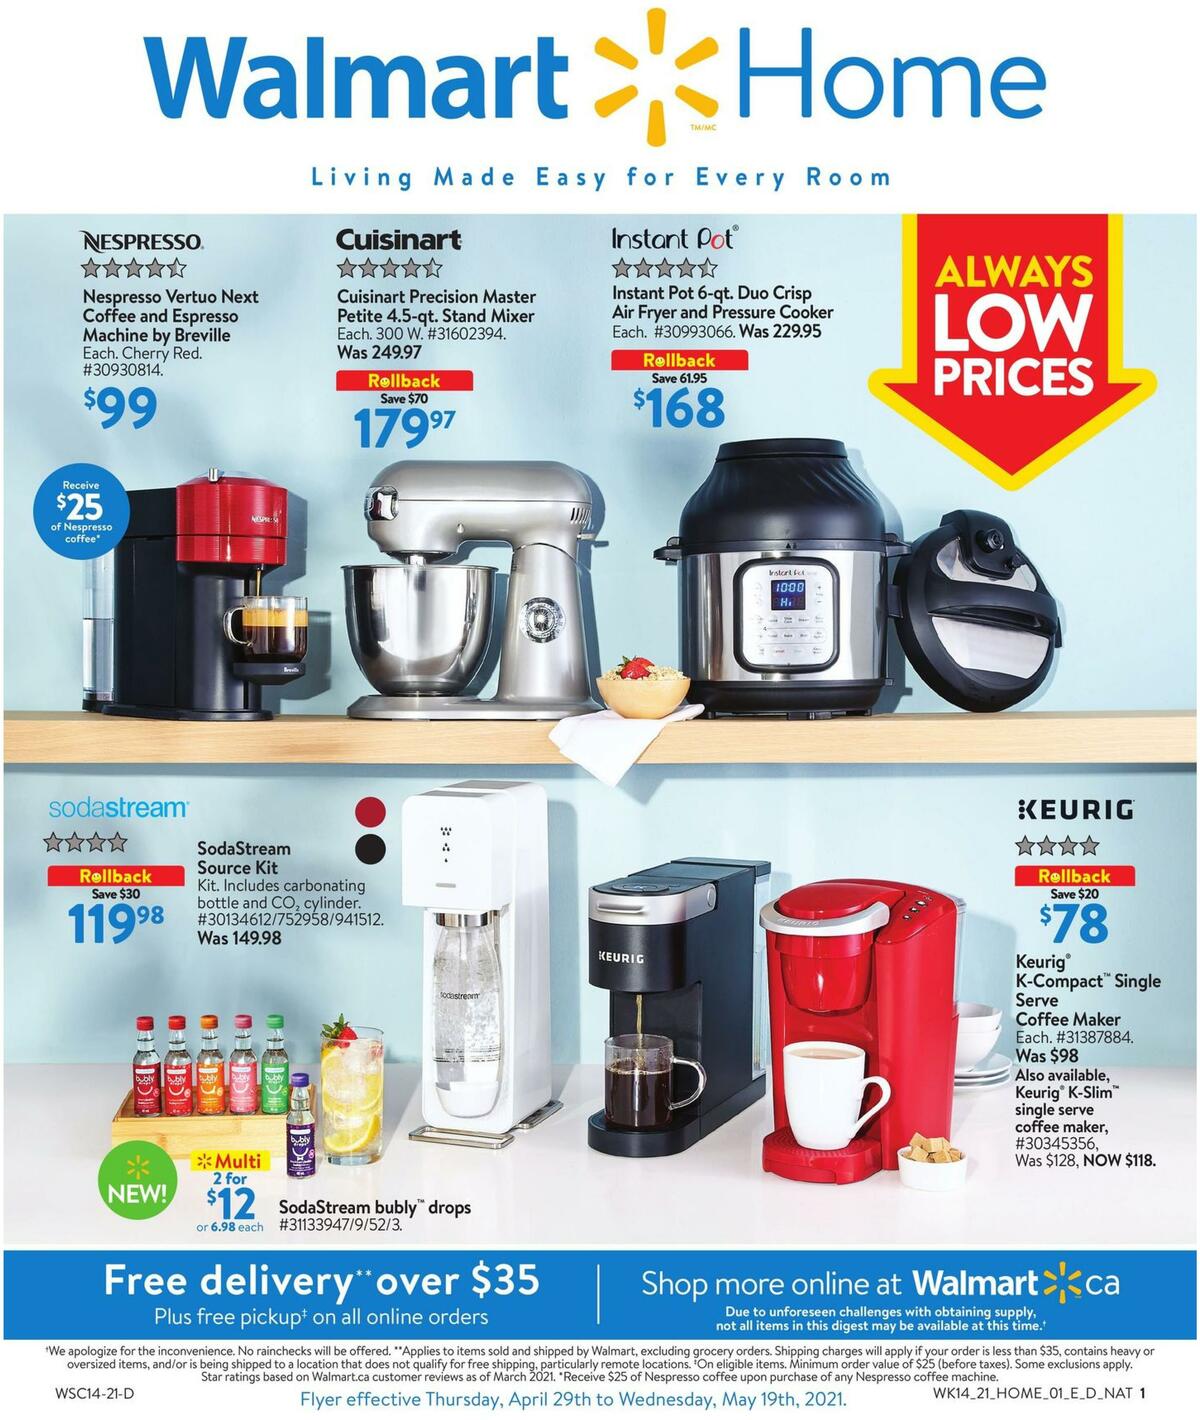 Walmart Home Flyer from April 29